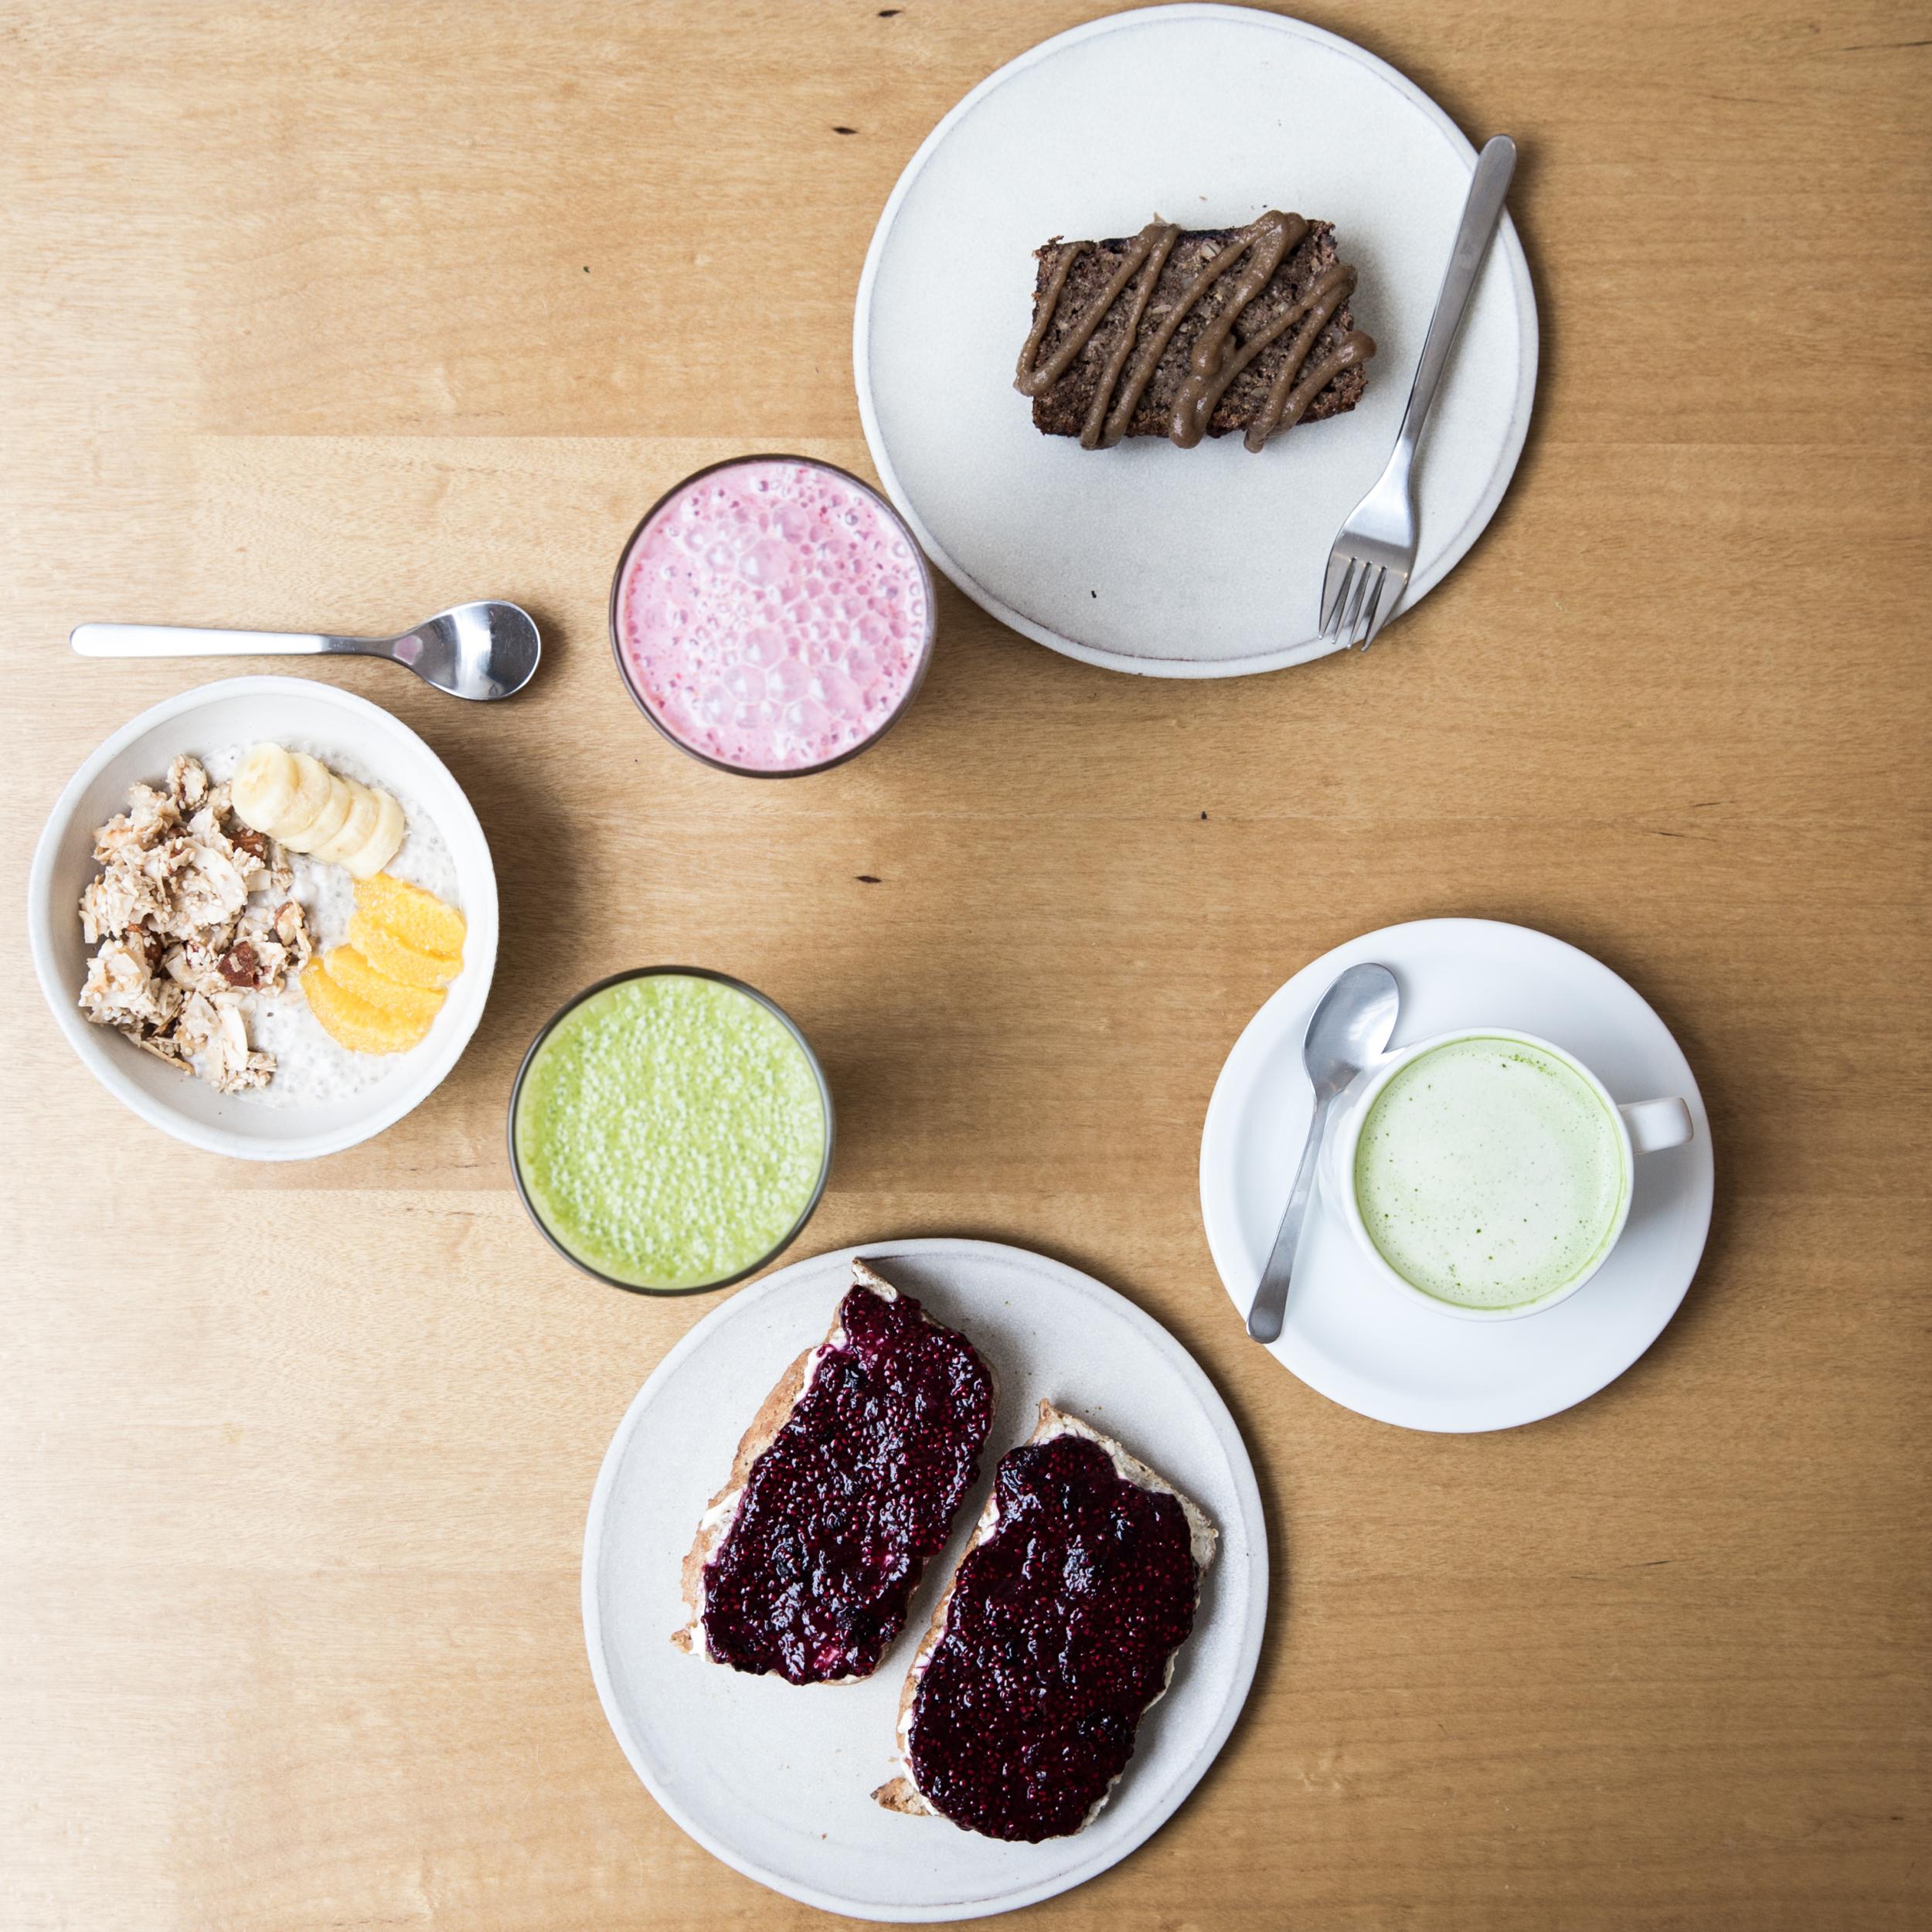 Expect almond milk-based smoothies, savoury bowls, good coffee and vegan cakes at Wellbar